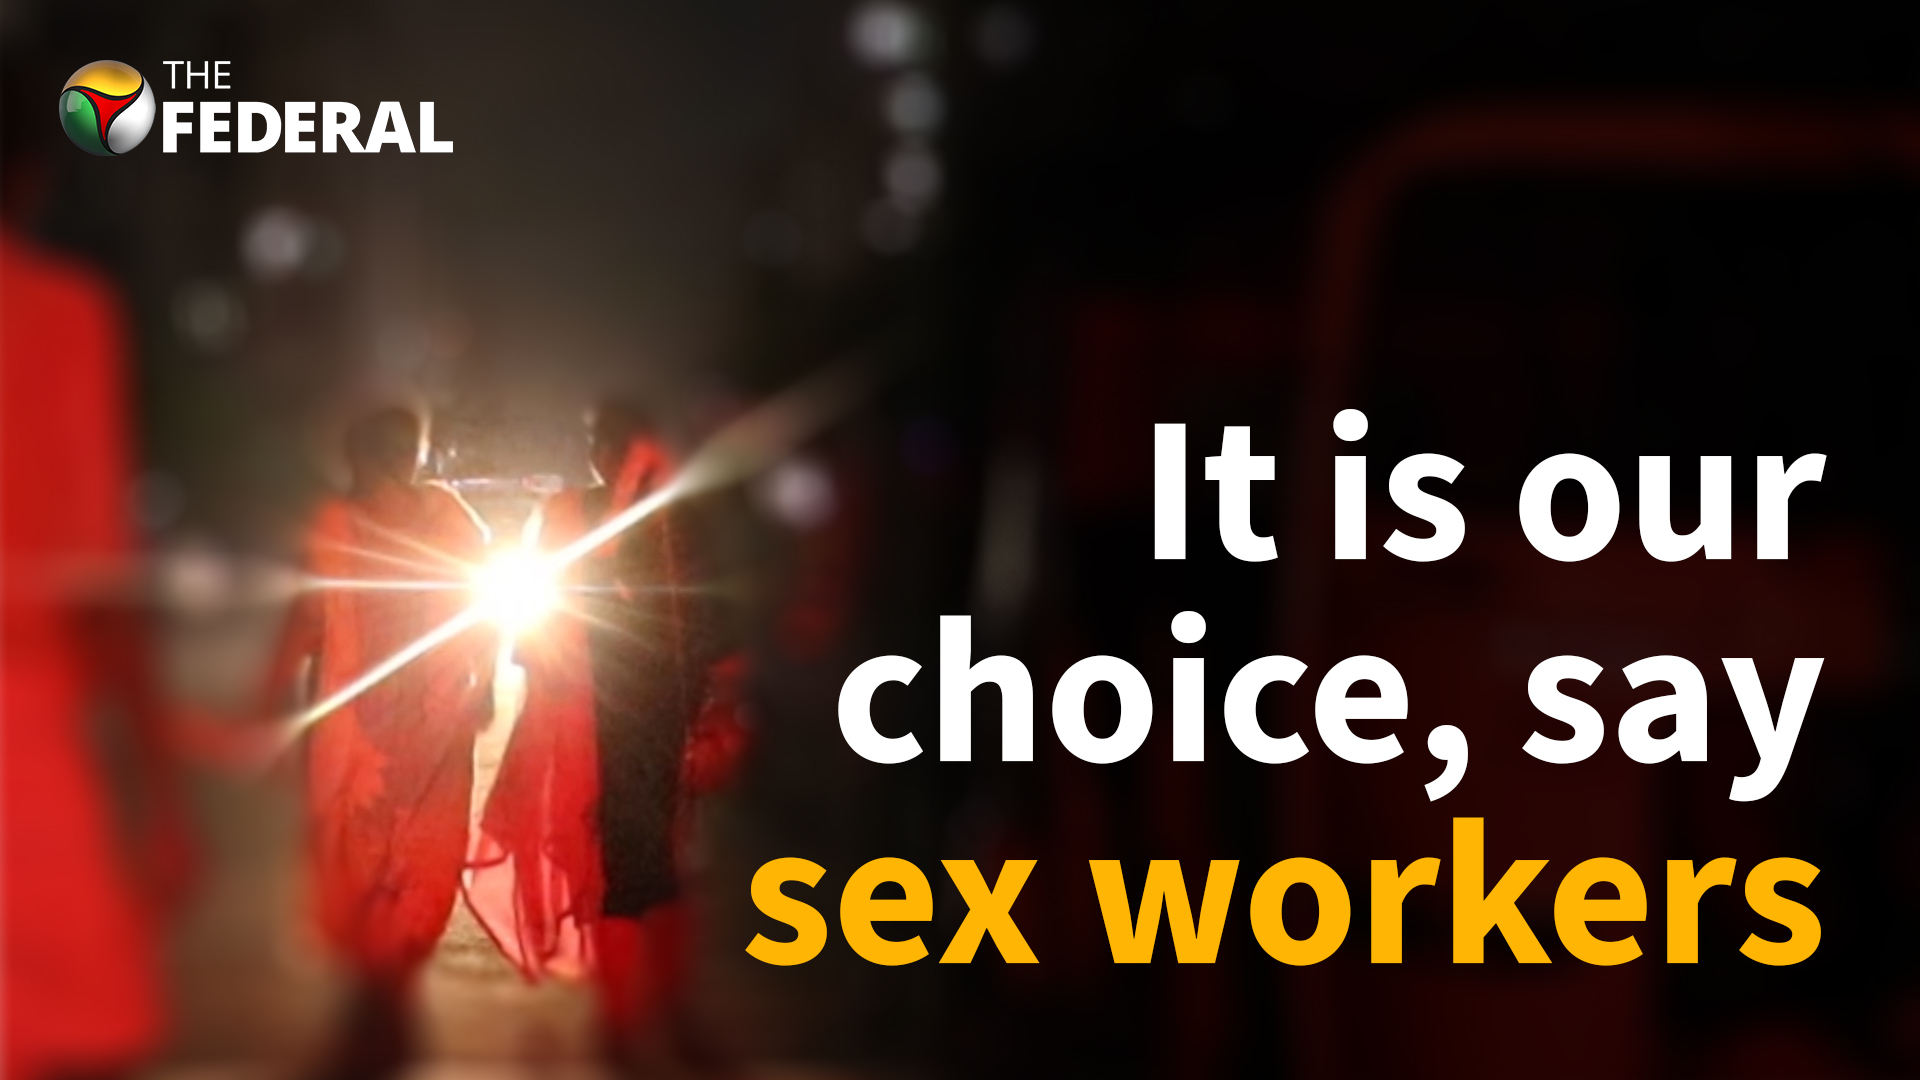 A hard profession but it is our choice, say sex workers